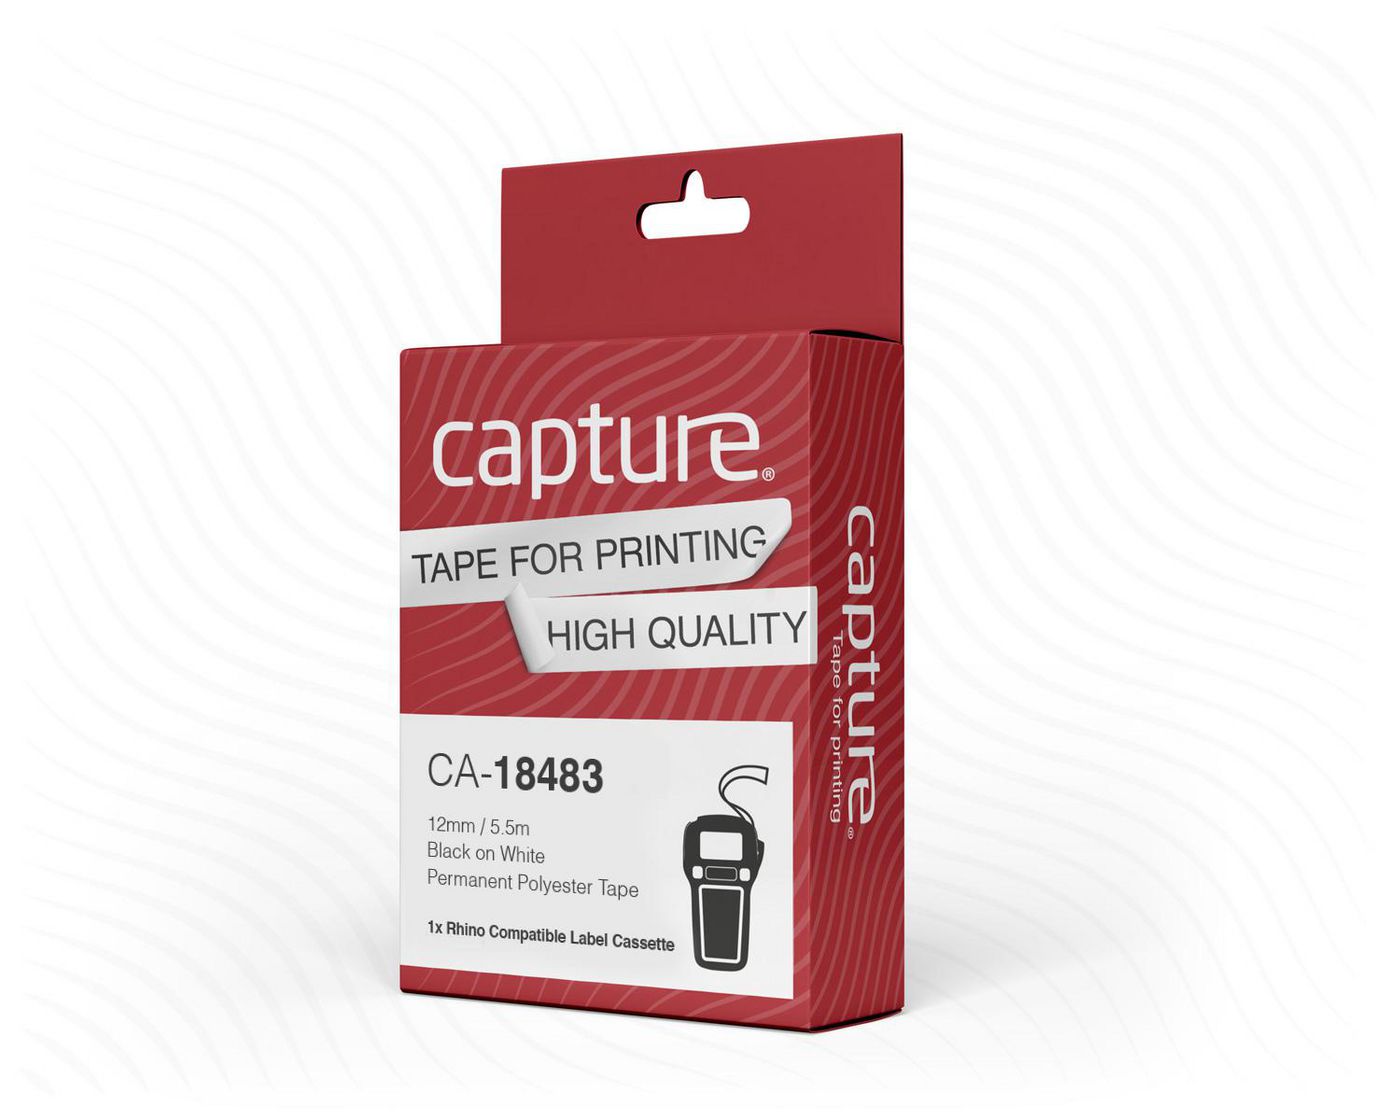 Capture 12mm x 5.5m Black on White  Permanent Polyester Tape  CA-18483 - eet01